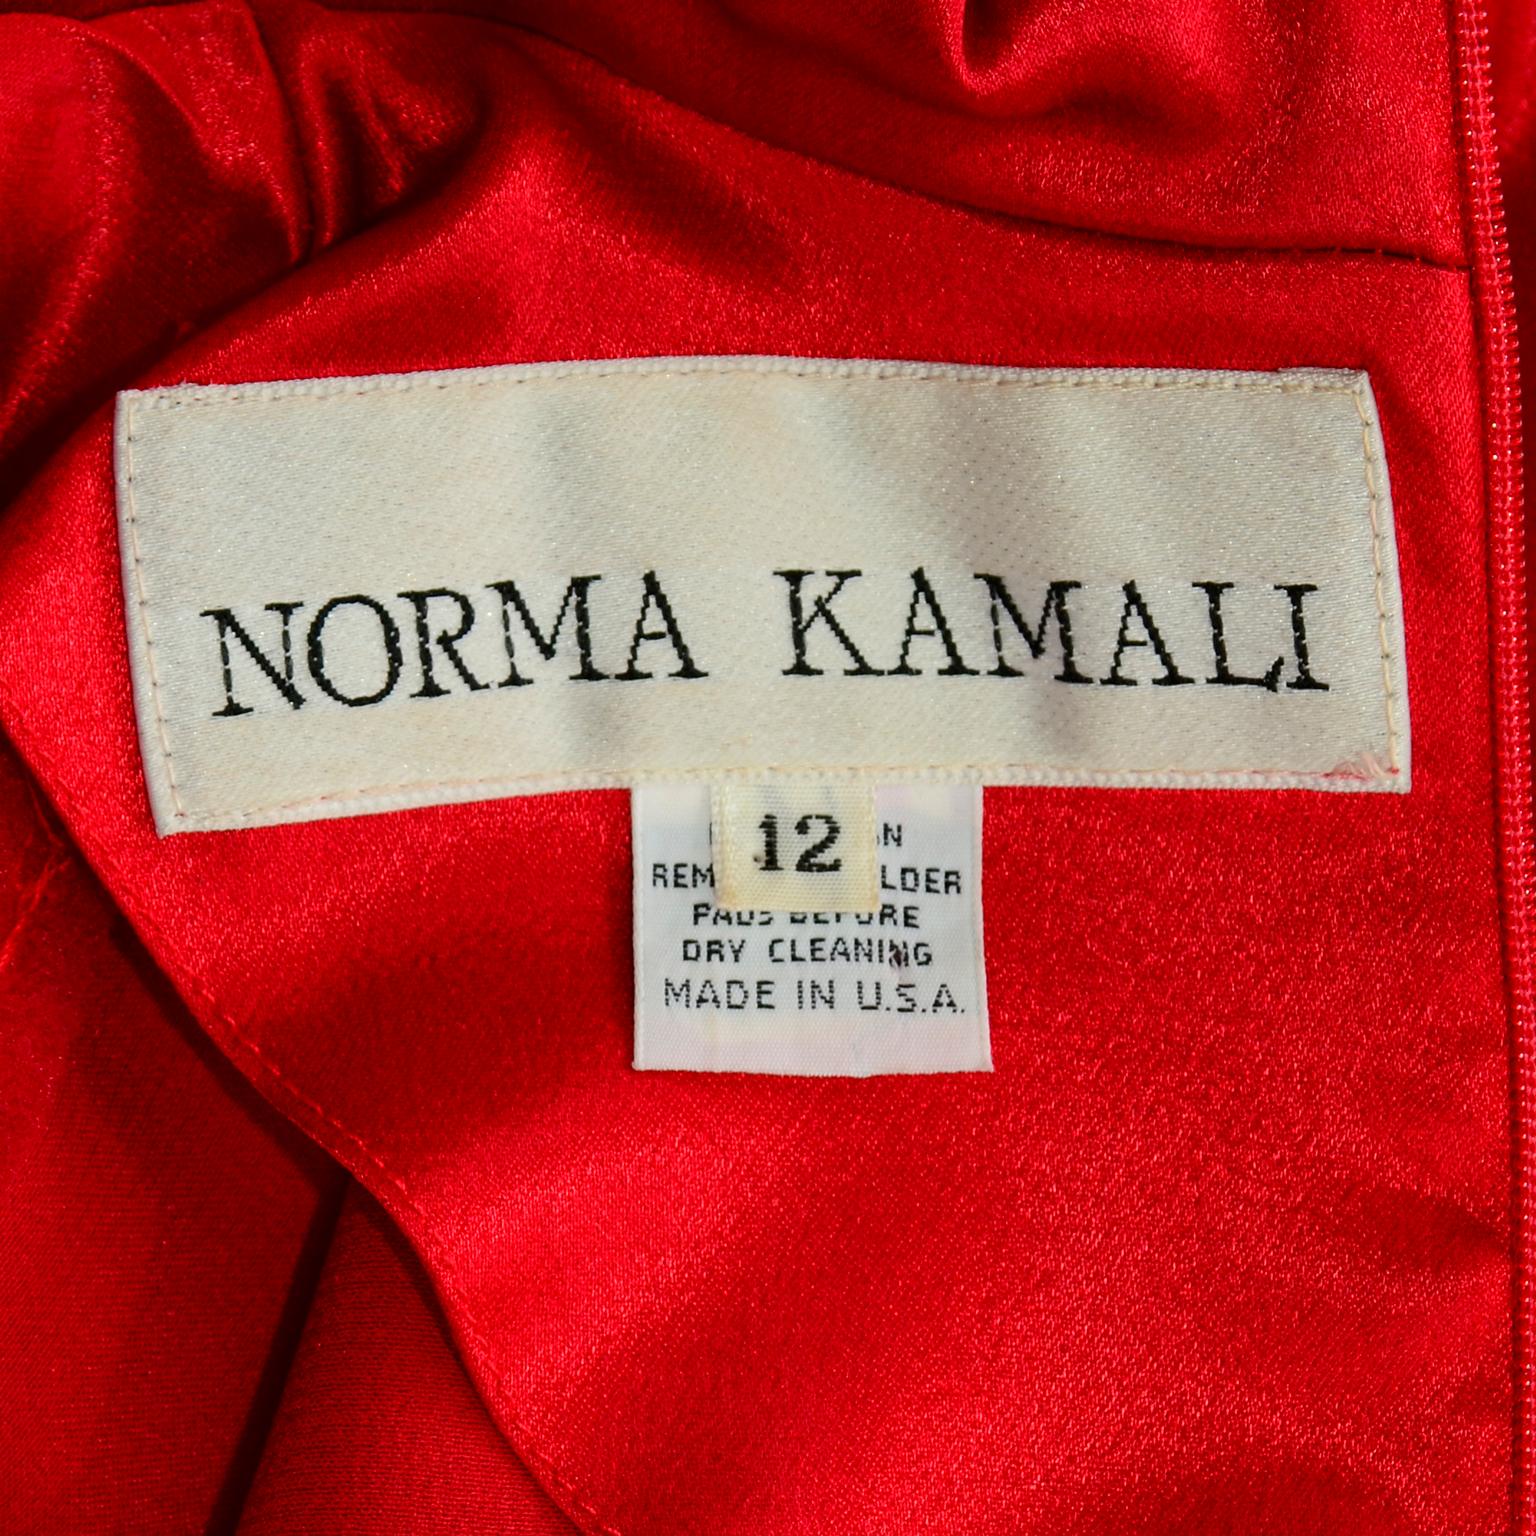 We adore vintage Norma Kamali pieces and this red satin jumpsuit is simply stunning! This Norma Kamali jumpsuit would make a wonderful evening dress alternative! This fabulous vintage one piece jumpsuit has a keyhole opening, a peter pan collar and